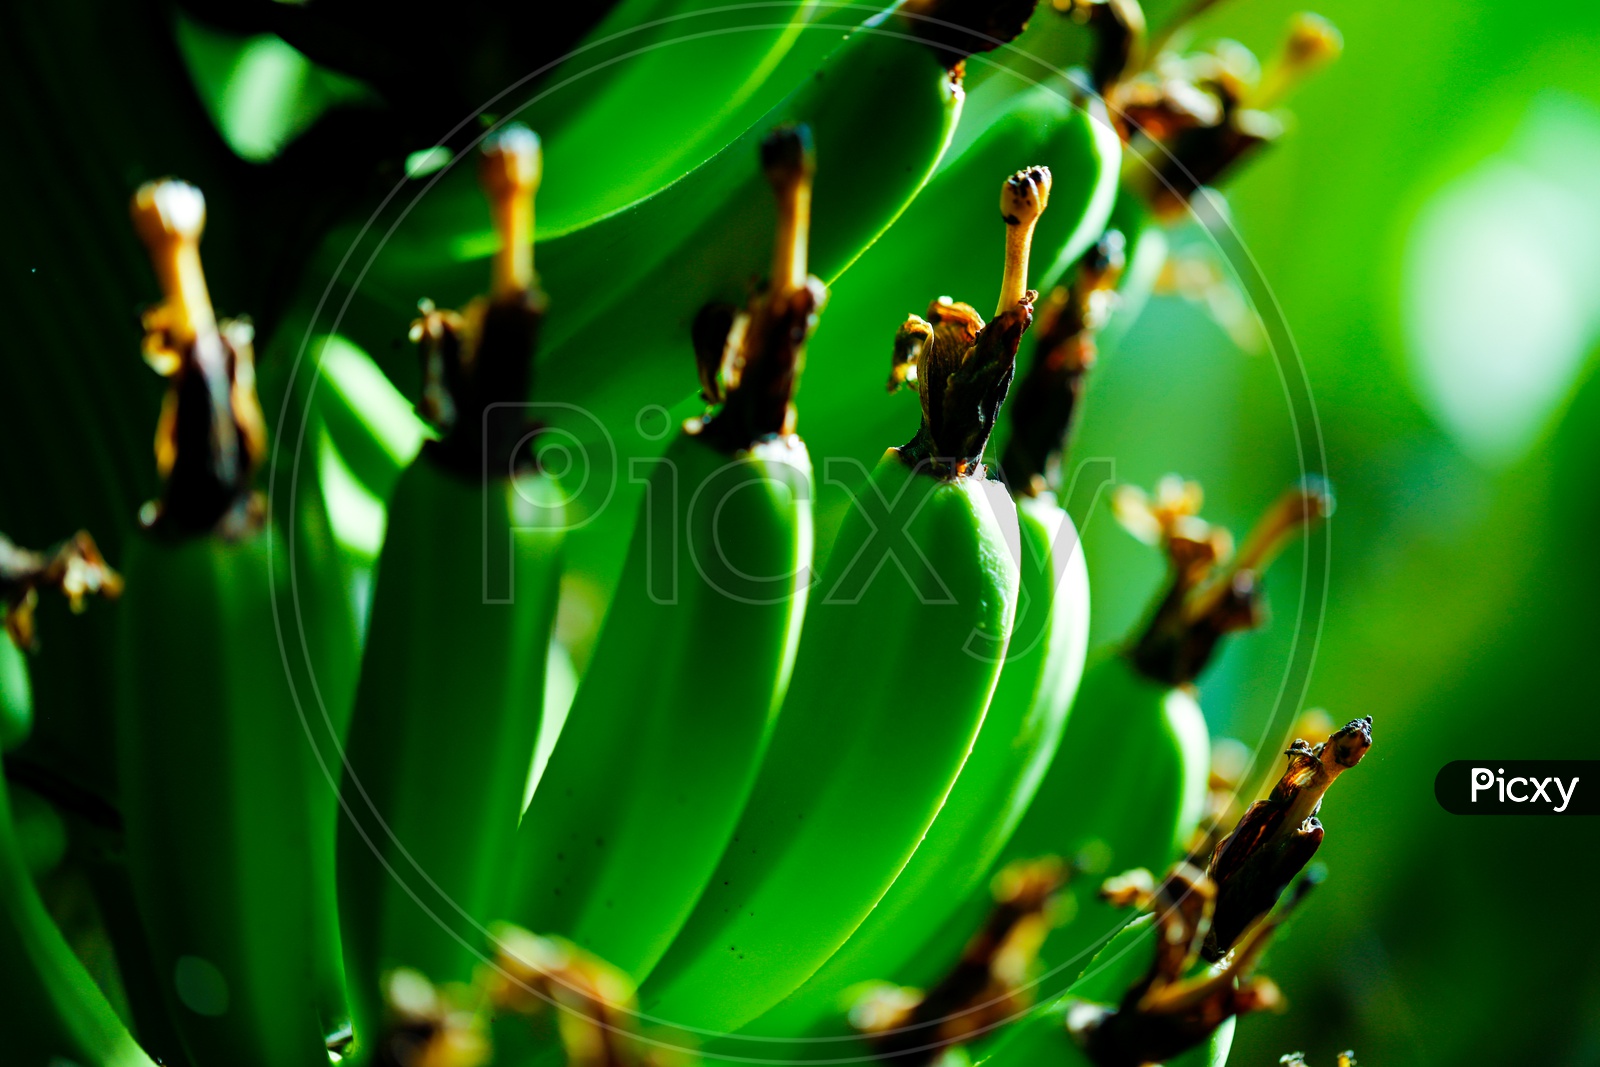 Bananas Growing on Green Farm  Lands  Background